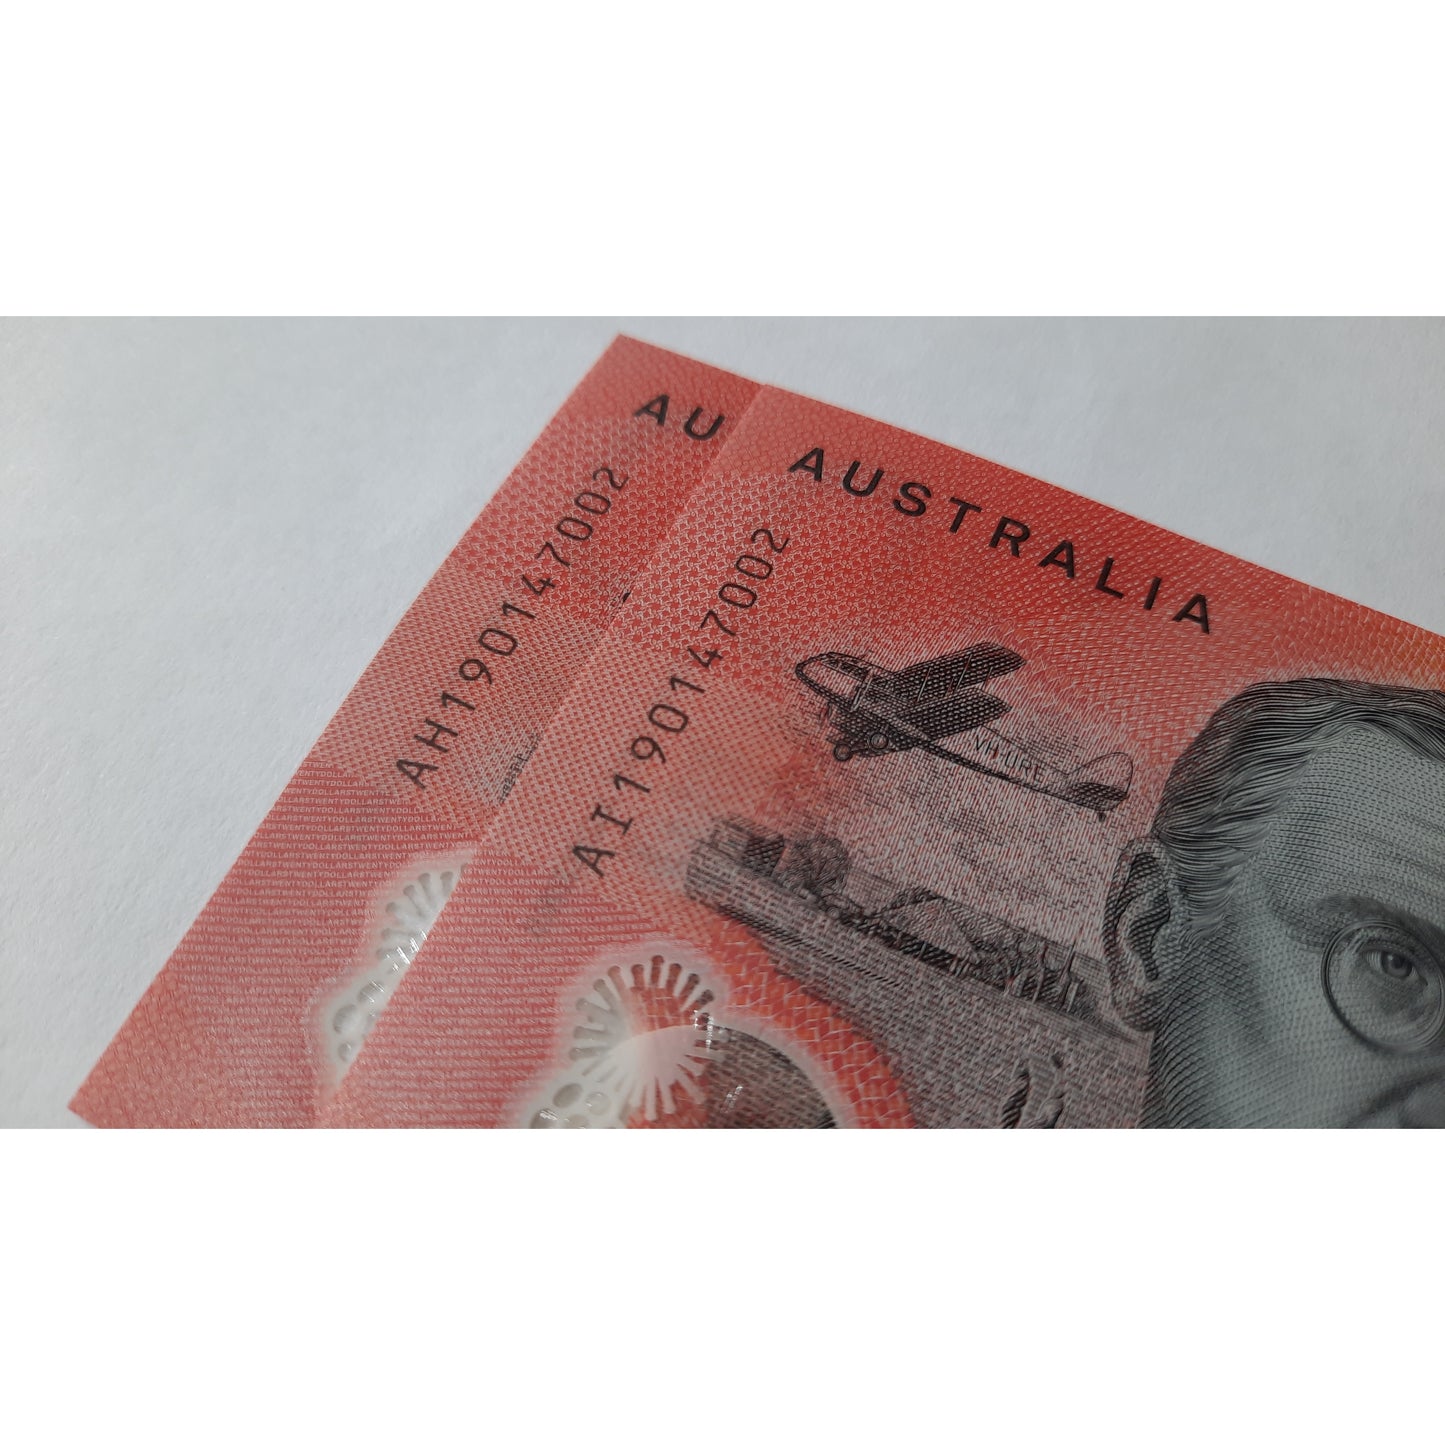 2019 $20 Lowe/Fraser Bank Note General Prefix UNC - Matching Serial Number